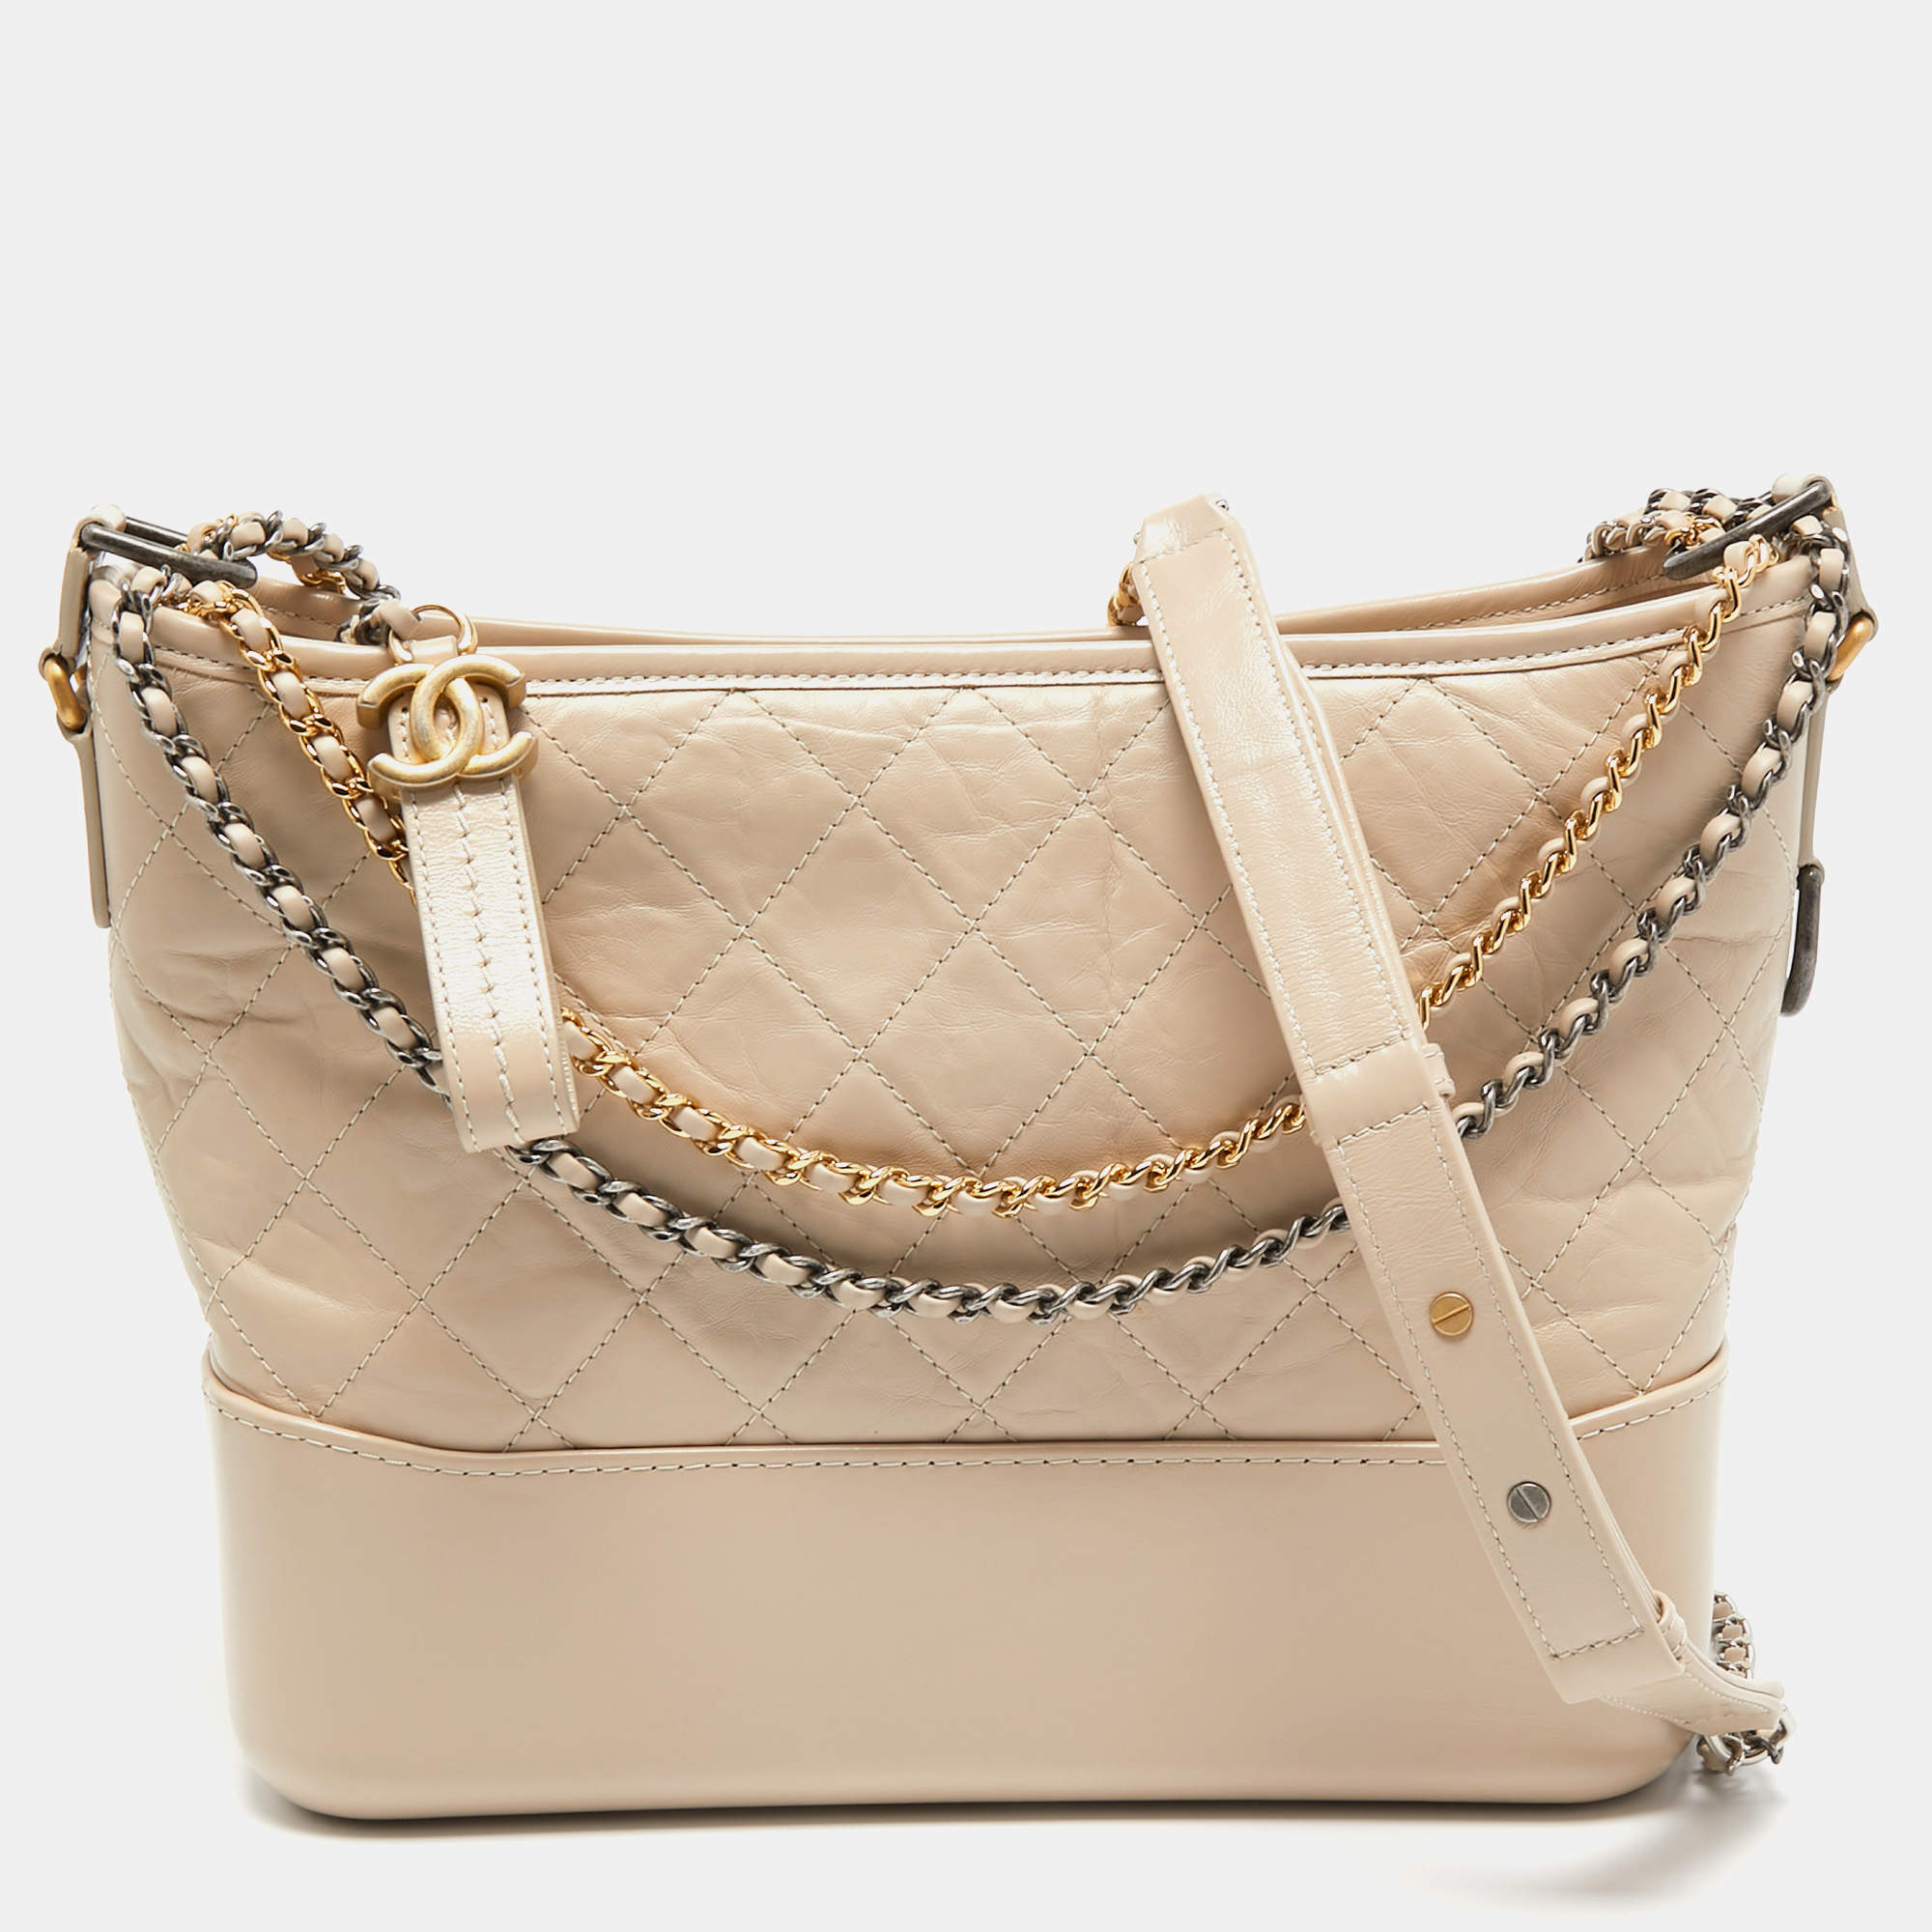 Chanel Beige Quilted Leather Large Gabrielle Hobo